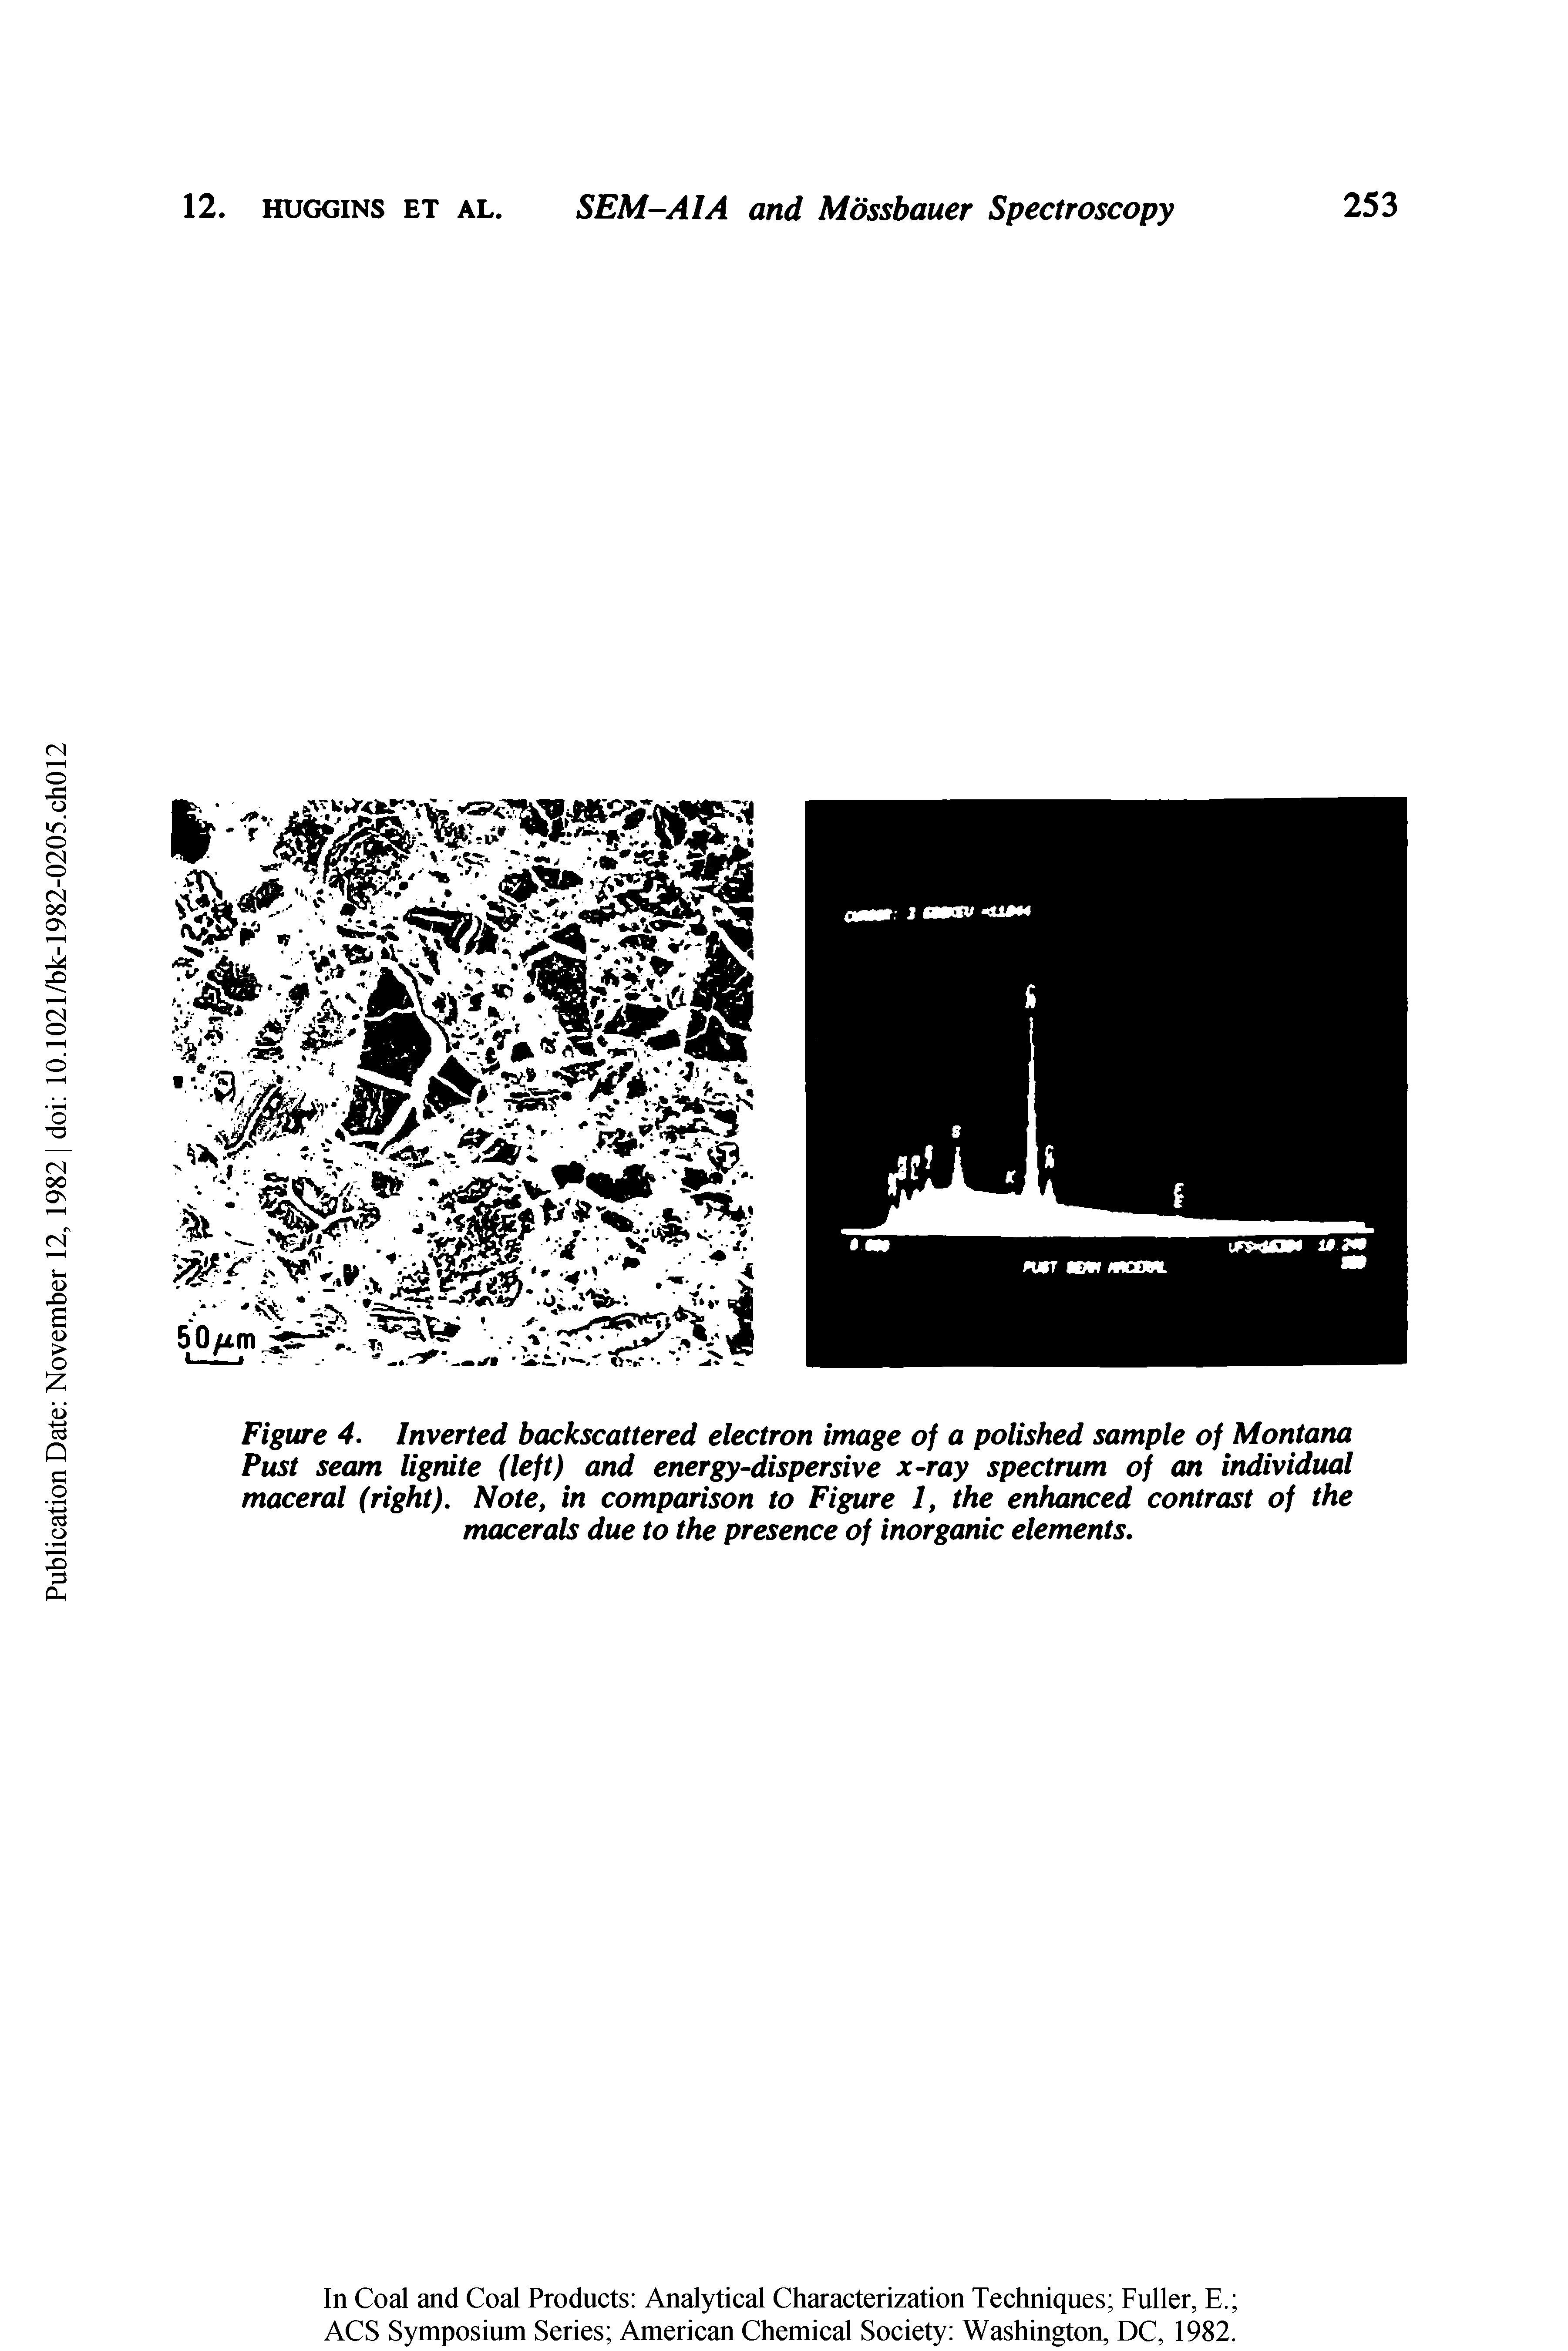 Figure 4. Inverted backscattered electron image of a polished sample of Montana Past seam lignite (left) and energy-dispersive x-ray spectrum of an individual maceral (right). Note, in comparison to Figure 1, the enhanced contrast of the macerals due to the presence of inorganic elements.